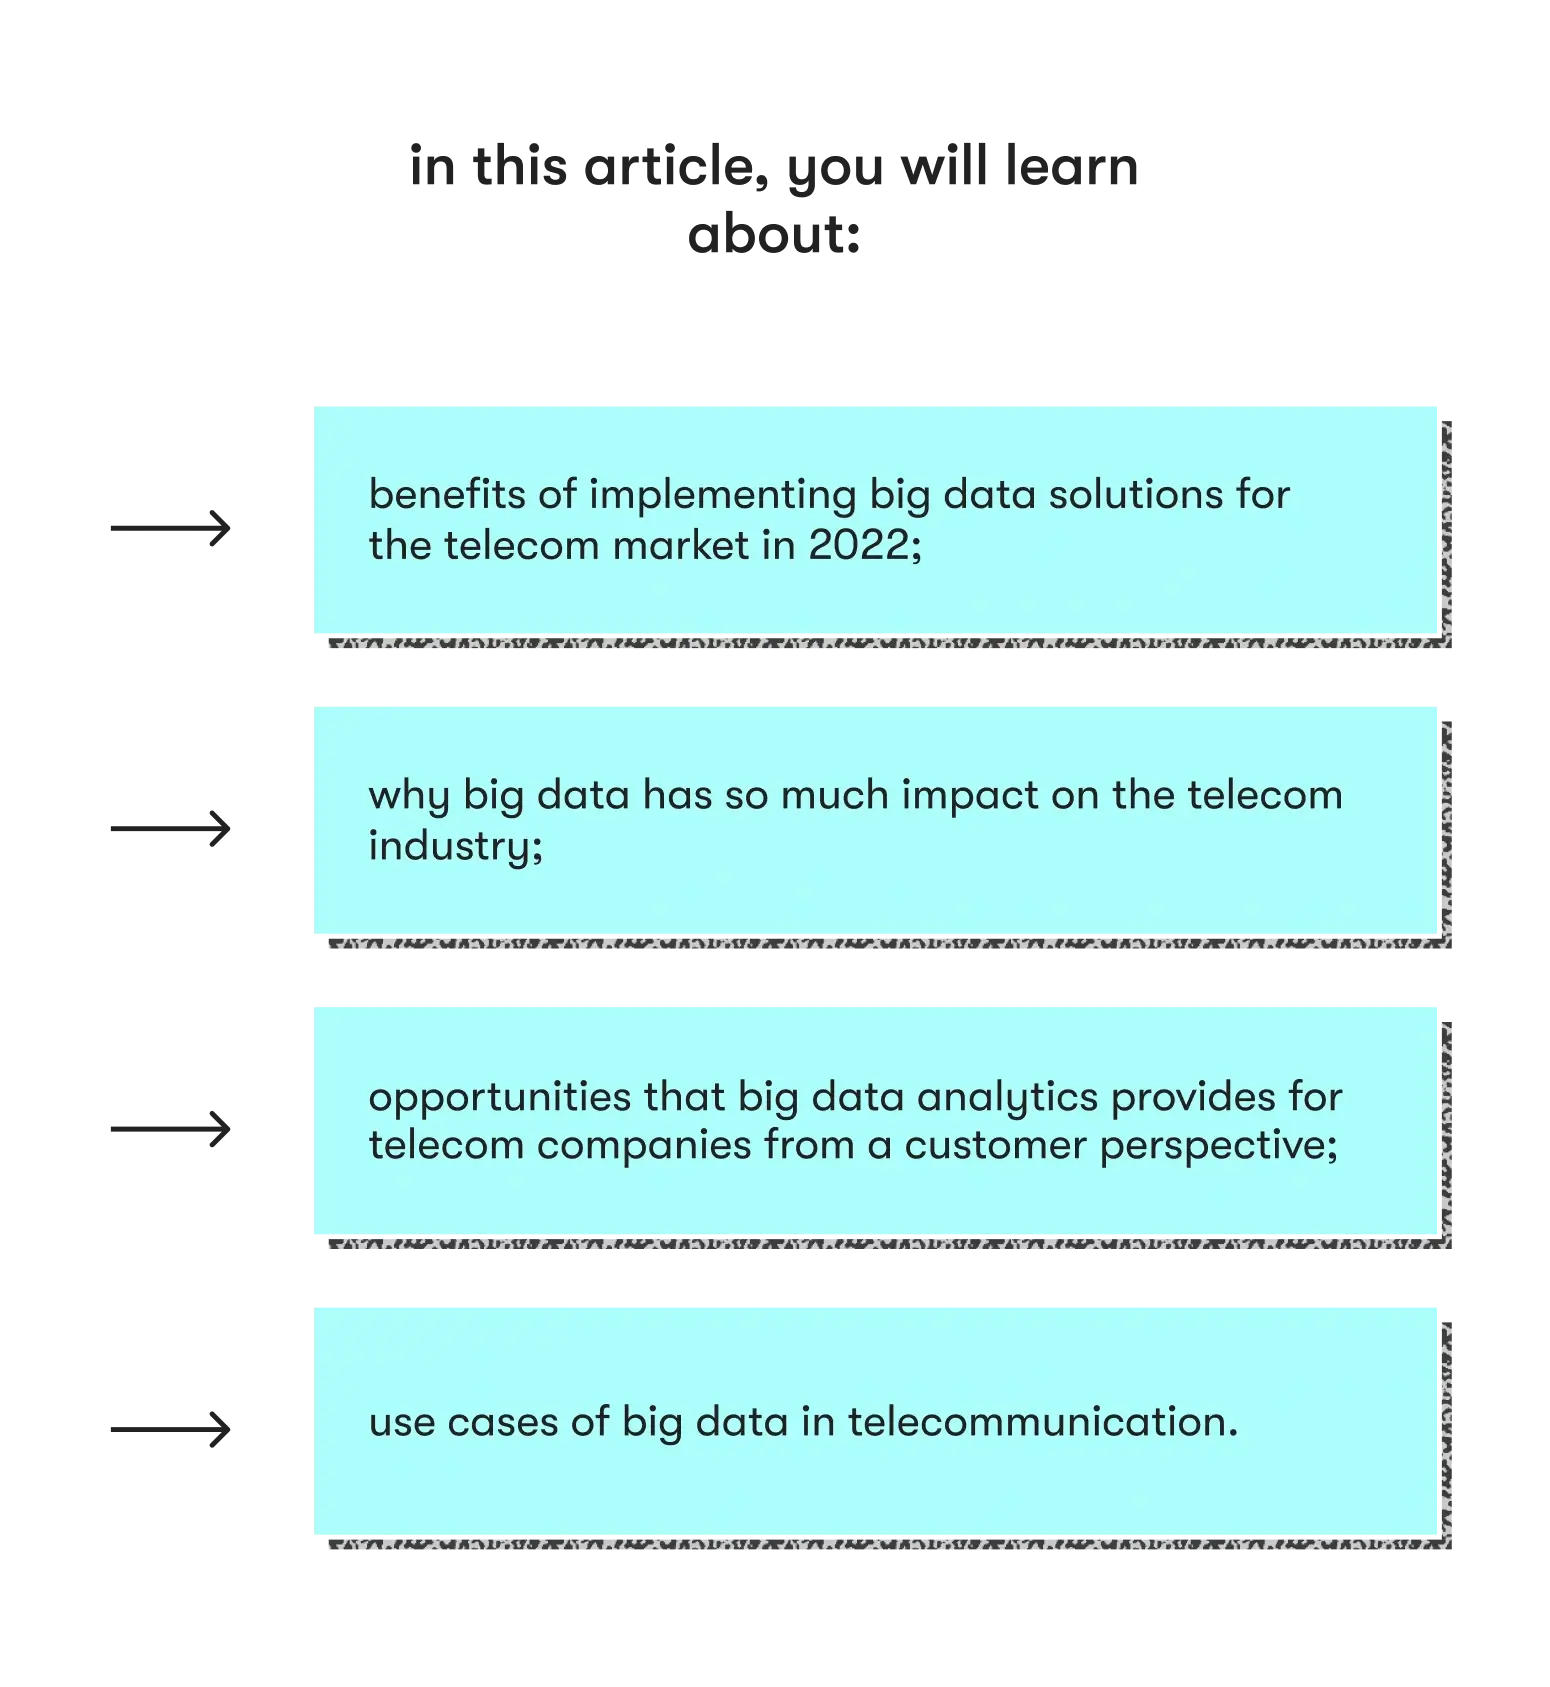 Things to know about Big Data in the Telecom Industry